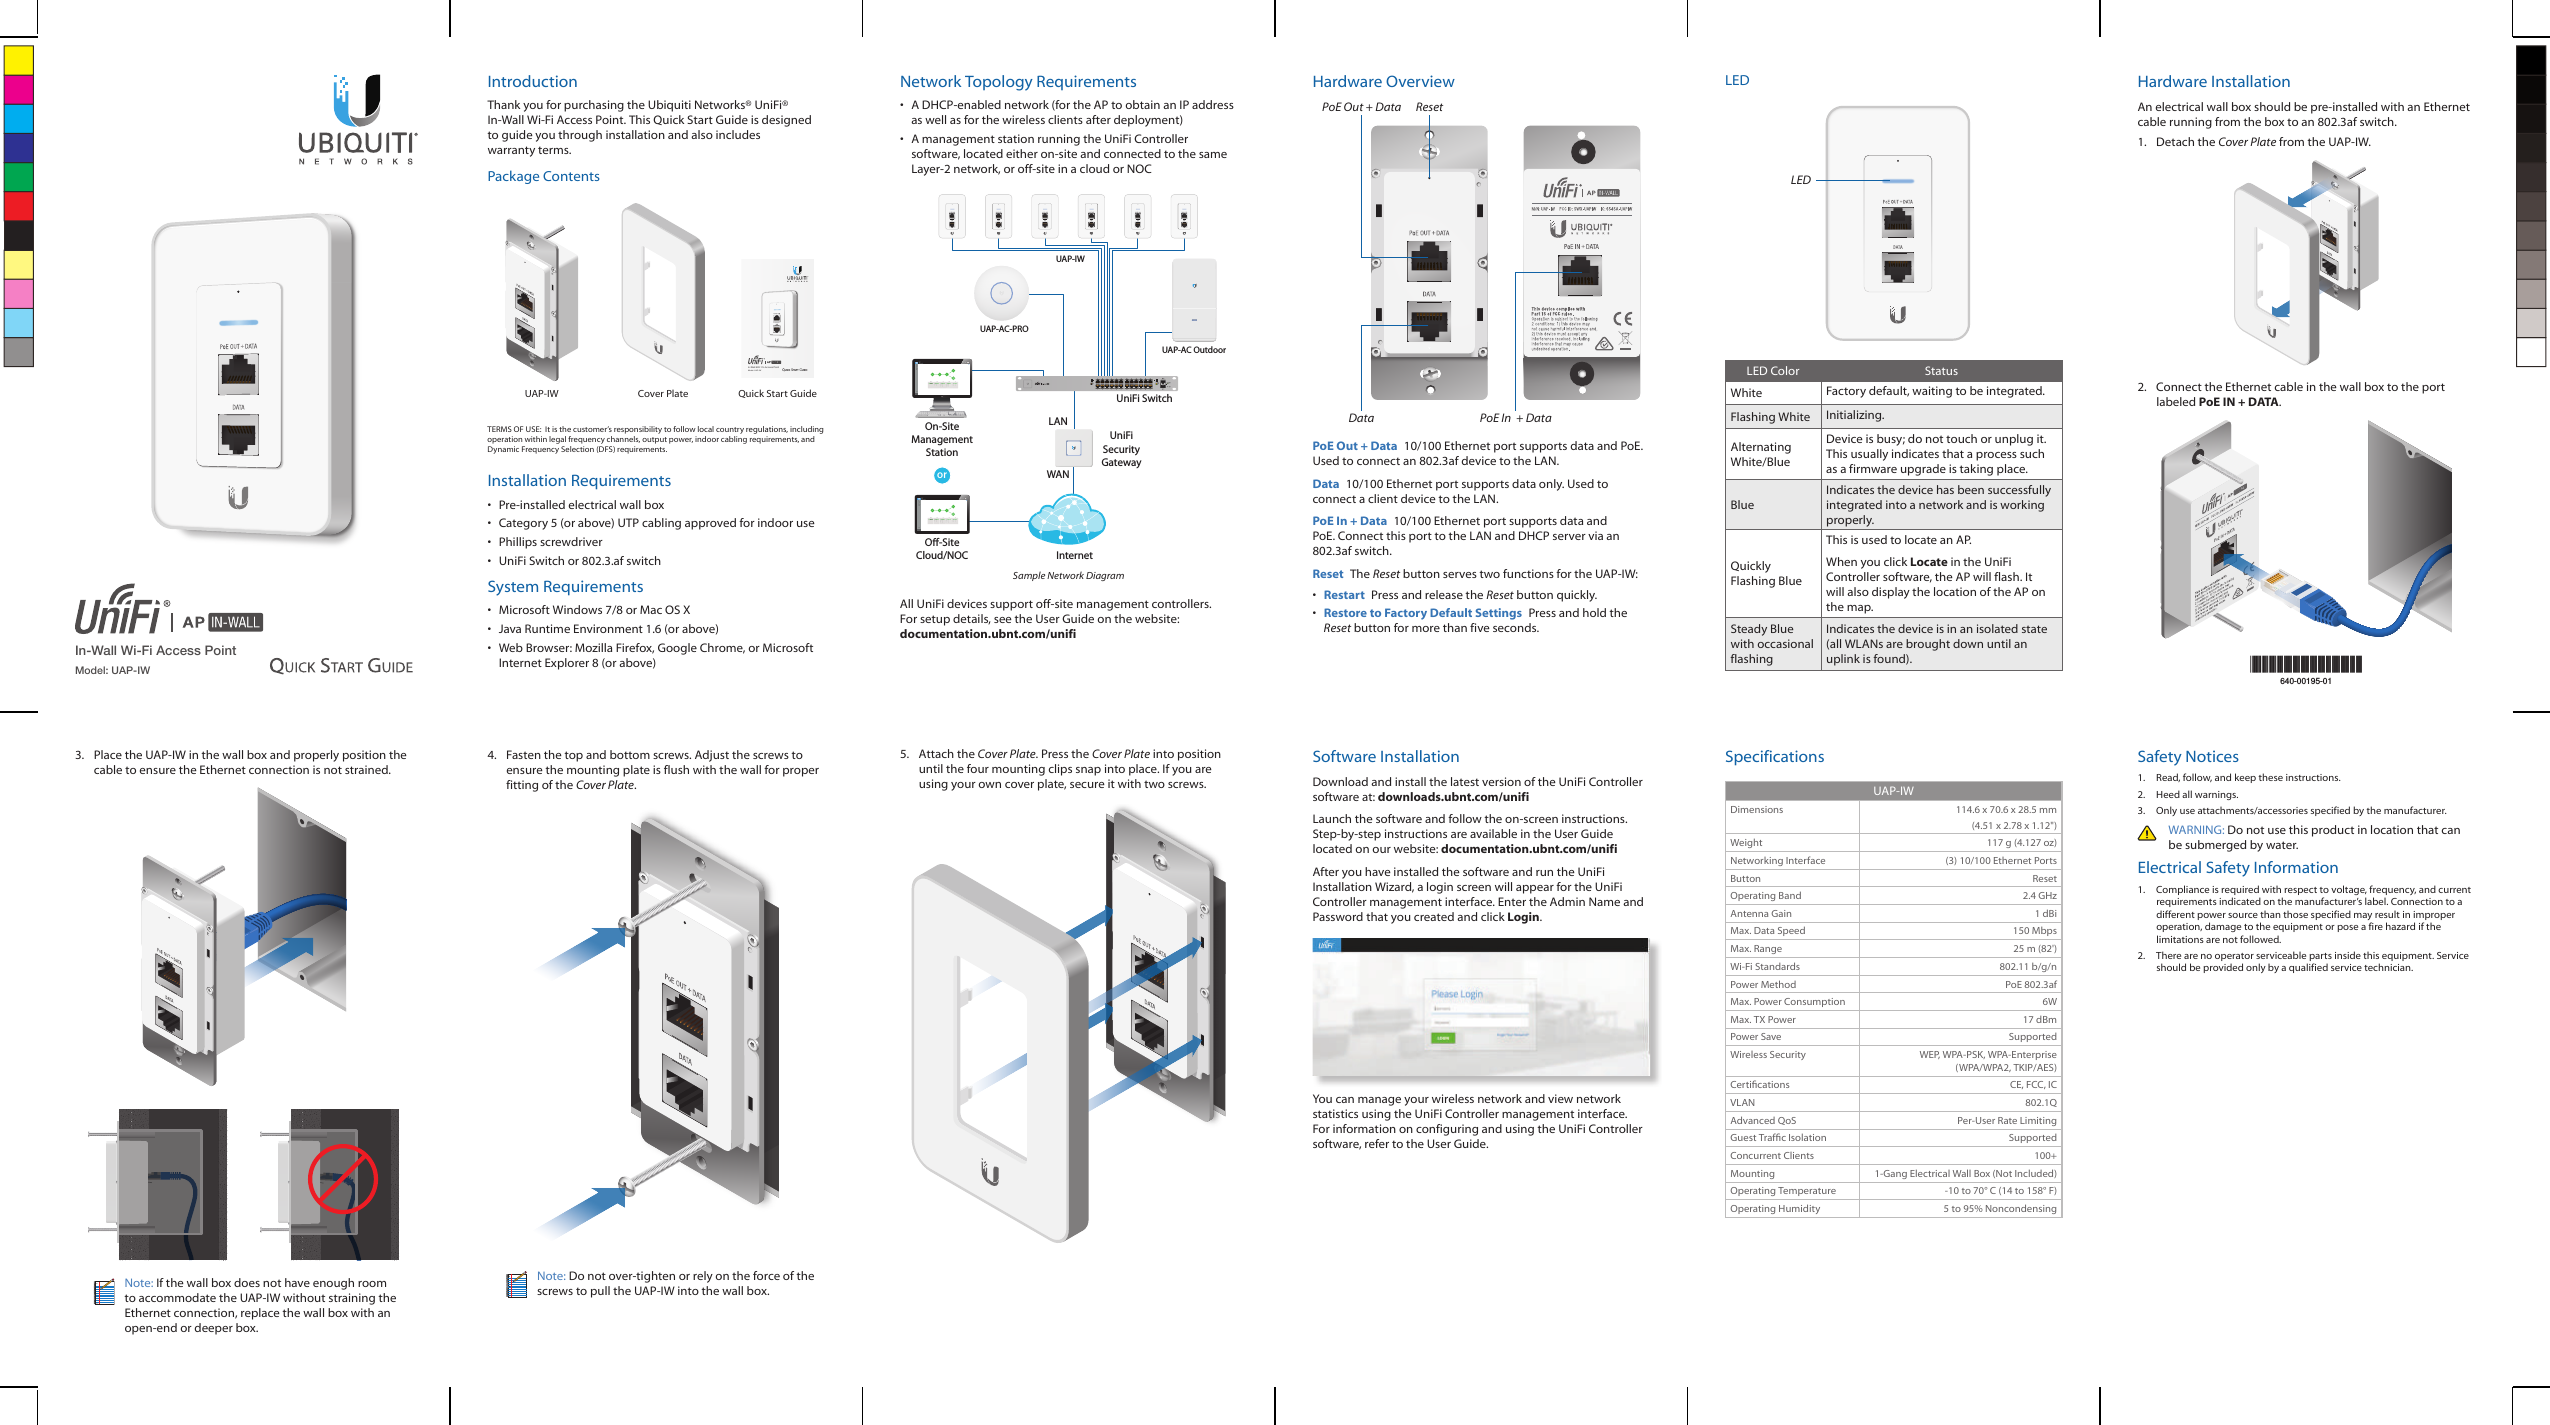 In-Wall Wi-Fi Access PointModel: UAP-IWIntroductionThank you for purchasing the Ubiquiti Networks® UniFi® In‑Wall Wi‑Fi Access Point. This Quick Start Guide is designed to guide you through installation and also includes warrantyterms.Package ContentsIn-Wall 802.11n Access PointModel: UAP-IWUAP‑IW Cover Plate Quick Start GuideTERMS OF USE:  It is the customer’s responsibility to follow local country regulations, including operation within legal frequency channels, output power, indoor cabling requirements, and Dynamic Frequency Selection (DFS) requirements.Installation Requirements•  Pre‑installed electrical wall box•  Category 5 (or above) UTP cabling approved for indoor use•  Phillips screwdriver•  UniFi Switch or 802.3.af switchSystem Requirements•  Microsoft Windows 7/8 or Mac OS X•  Java Runtime Environment 1.6 (or above)•  Web Browser: Mozilla Firefox, Google Chrome, or Microsoft Internet Explorer 8 (or above)Network Topology Requirements•  A DHCP-enabled network (for the AP to obtain an IP address as well as for the wireless clients after deployment)•  A management station running the UniFi Controller software, located either on-site and connected to the same Layer-2 network, or off-site in a cloud or NOCUAP-AC OutdoororNetwork Healthwww WAN LANWLANVOIPwww WAN LAN WLAN VOIPIPDNSGATEWAYACTIVE CLIENTSDOWNUPSWITCHESUSERSGUESTSDOWNUPAPSUSERSGUESTSDOWNUPPHONESEXTENSIONCALLS INCALLS OUTXXX.XXX.XXX.XXXXXX.XXX.XXX.XXX 1920000001622000304360DASHBOARDMAPDEVICESCLIENTSCALLSSTATISTICSINSIGHTSSETTINGSCURRENT SITEDefaultREFRESH RATE2 minutesNetwork Healthwww WAN LANWLANVOIPwww WAN LAN WLAN VOIPIPDNSGATEWAYACTIVE CLIENTSDOWNUPSWITCHESUSERSGUESTSDOWNUPAPSUSERSGUESTSDOWNUPPHONESEXTENSIONCALLS INCALLS OUTXXX.XXX.XXX.XXXXXX.XXX.XXX.XXX 1920000001622000304360DASHBOARDMAPDEVICESCLIENTSCALLSSTATISTICSINSIGHTSSETTINGSCURRENT SITEDefaultREFRESH RATE2 minutesO-SiteCloud/NOCOn-SiteManagementStationUniFi SwitchUniFiSecurityGatewayInternetUAP-AC-PROUAP-IWLANWAN1GSample Network DiagramAll UniFi devices support off-site management controllers. For setup details, see the User Guide on the website: documentation.ubnt.com/unifiHardware OverviewDataPoE Out + Data ResetPoE In  + DataPoE Out + Data  10/100 Ethernet port supports data and PoE. Used to connect an 802.3af device to the LAN. Data  10/100 Ethernet port supports data only. Used to connect a client device to the LAN.PoE In + Data  10/100 Ethernet port supports data and PoE. Connect this port to the LAN and DHCP server via an 802.3afswitch.Reset  The Reset button serves two functions for the UAP-IW:•  Restart  Press and release the Reset button quickly.•  Restore to Factory Default Settings  Press and hold the Reset button for more than five seconds.LEDLEDLED Color StatusWhite Factory default, waiting to be integrated.Flashing White Initializing. Alternating White/BlueDevice is busy; do not touch or unplug it. This usually indicates that a process such as a firmware upgrade is taking place.BlueIndicates the device has been successfully integrated into a network and is working properly. Quickly Flashing BlueThis is used to locate an AP. When you click Locate in the UniFi Controller software, the AP will flash. It will also display the location of the AP on the map.Steady Blue with occasional flashingIndicates the device is in an isolated state (all WLANs are brought down until an uplink is found).Hardware InstallationAn electrical wall box should be pre-installed with an Ethernet cable running from the box to an 802.3af switch.1.  Detach the Cover Plate from the UAP-IW.2.  Connect the Ethernet cable in the wall box to the port labeled PoE IN + DATA.*640-00195-01*640-00195-013.  Place the UAP-IW in the wall box and properly position the cable to ensure the Ethernet connection is not strained. Note: If the wall box does not have enough room to accommodate the UAP-IW without straining the Ethernet connection, replace the wall box with an open-end or deeper box.4.  Fasten the top and bottom screws. Adjust the screws to ensure the mounting plate is flush with the wall for proper fitting of the Cover Plate. Note: Do not over-tighten or rely on the force of the screws to pull the UAP-IW into the wall box. 5.  Attach the Cover Plate. Press the Cover Plate into position until the four mounting clips snap into place. If you are using your own cover plate, secure it with two screws.Software InstallationDownload and install the latest version of the UniFi Controller software at: downloads.ubnt.com/unifiLaunch the software and follow the on-screen instructions. Step-by-step instructions are available in the User Guide located on our website: documentation.ubnt.com/unifiAfter you have installed the software and run the UniFi Installation Wizard, a login screen will appear for the UniFi Controller management interface. Enter the Admin Name and Password that you created and click Login. You can manage your wireless network and view network statistics using the UniFi Controller management interface. For information on configuring and using the UniFi Controller software, refer to the User Guide.SpecificationsUAP-IWDimensions 114.6 x 70.6 x 28.5 mm(4.51 x 2.78 x 1.12&quot;)Weight 117 g (4.127 oz)Networking Interface (3) 10/100 Ethernet PortsButton ResetOperating Band 2.4 GHzAntenna Gain 1 dBiMax. Data Speed 150 MbpsMax. Range 25 m (82&apos;)Wi-Fi Standards 802.11 b/g/nPower Method PoE 802.3af Max. Power Consumption 6WMax. TX Power 17 dBmPower Save SupportedWireless Security WEP, WPA-PSK, WPA-Enterprise (WPA/WPA2, TKIP/AES)Certications CE, FCC, ICVLAN 802.1QAdvanced QoS Per-User Rate LimitingGuest Trafc Isolation SupportedConcurrent Clients 100+Mounting 1-Gang Electrical Wall Box (Not Included)Operating Temperature -10 to 70° C (14 to 158° F)Operating Humidity 5 to 95% NoncondensingSafety Notices1.  Read, follow, and keep these instructions.2.  Heed all warnings.3.  Only use attachments/accessories specified by the manufacturer.WARNING: Do not use this product in location that can be submerged by water. Electrical Safety Information1.  Compliance is required with respect to voltage, frequency, and current requirements indicated on the manufacturer’s label. Connection to a different power source than those specified may result in improper operation, damage to the equipment or pose a fire hazard if the limitations are not followed.2.  There are no operator serviceable parts inside this equipment. Service should be provided only by a qualified service technician.